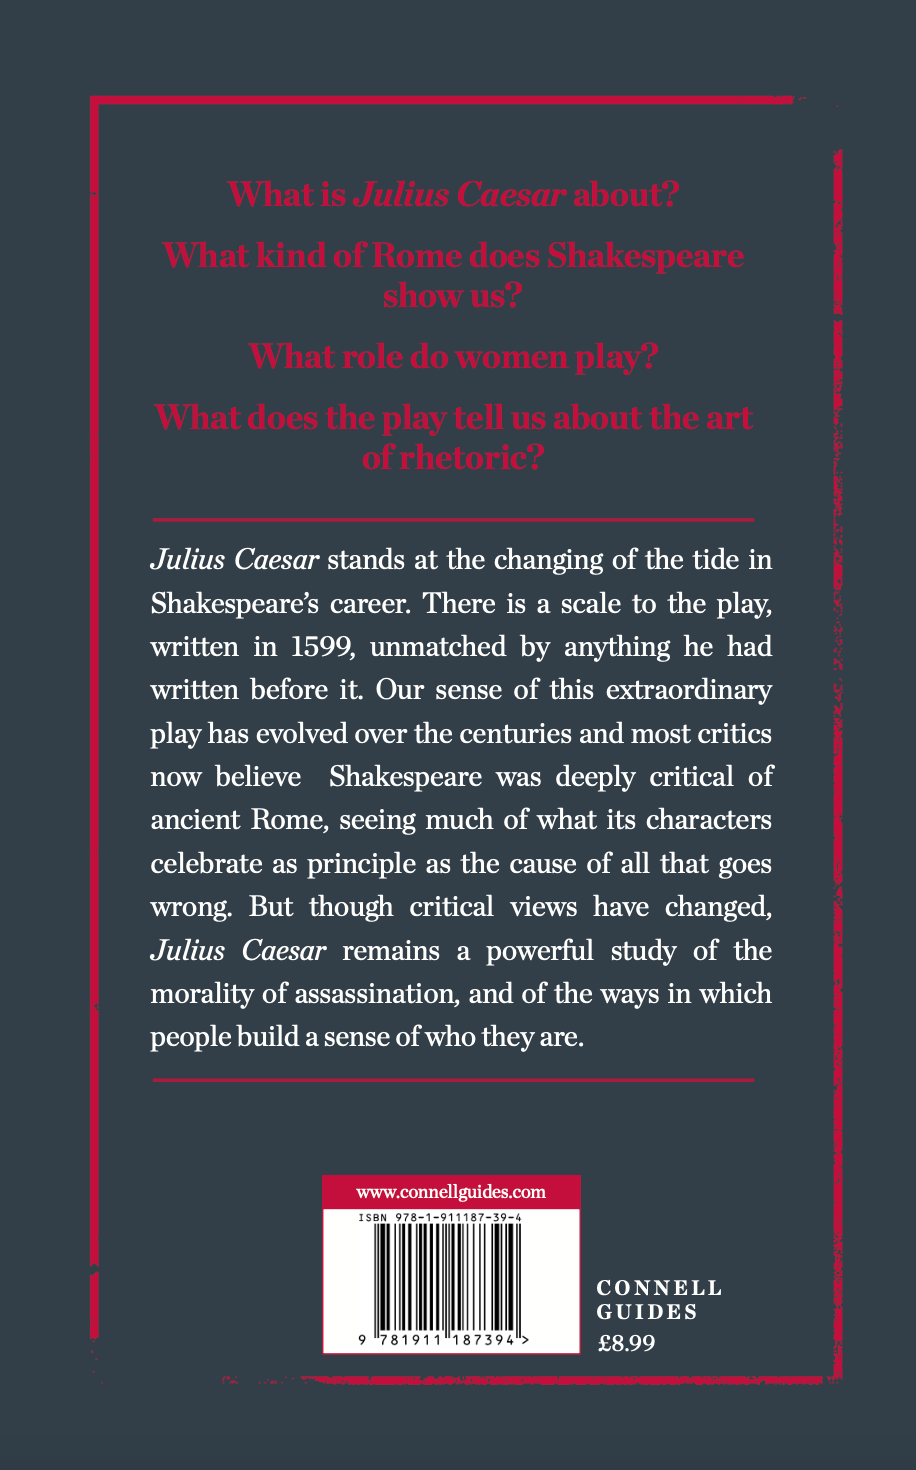 The Day x Connell Guides - The Connell Guide to Shakespeare's Julius Caesar